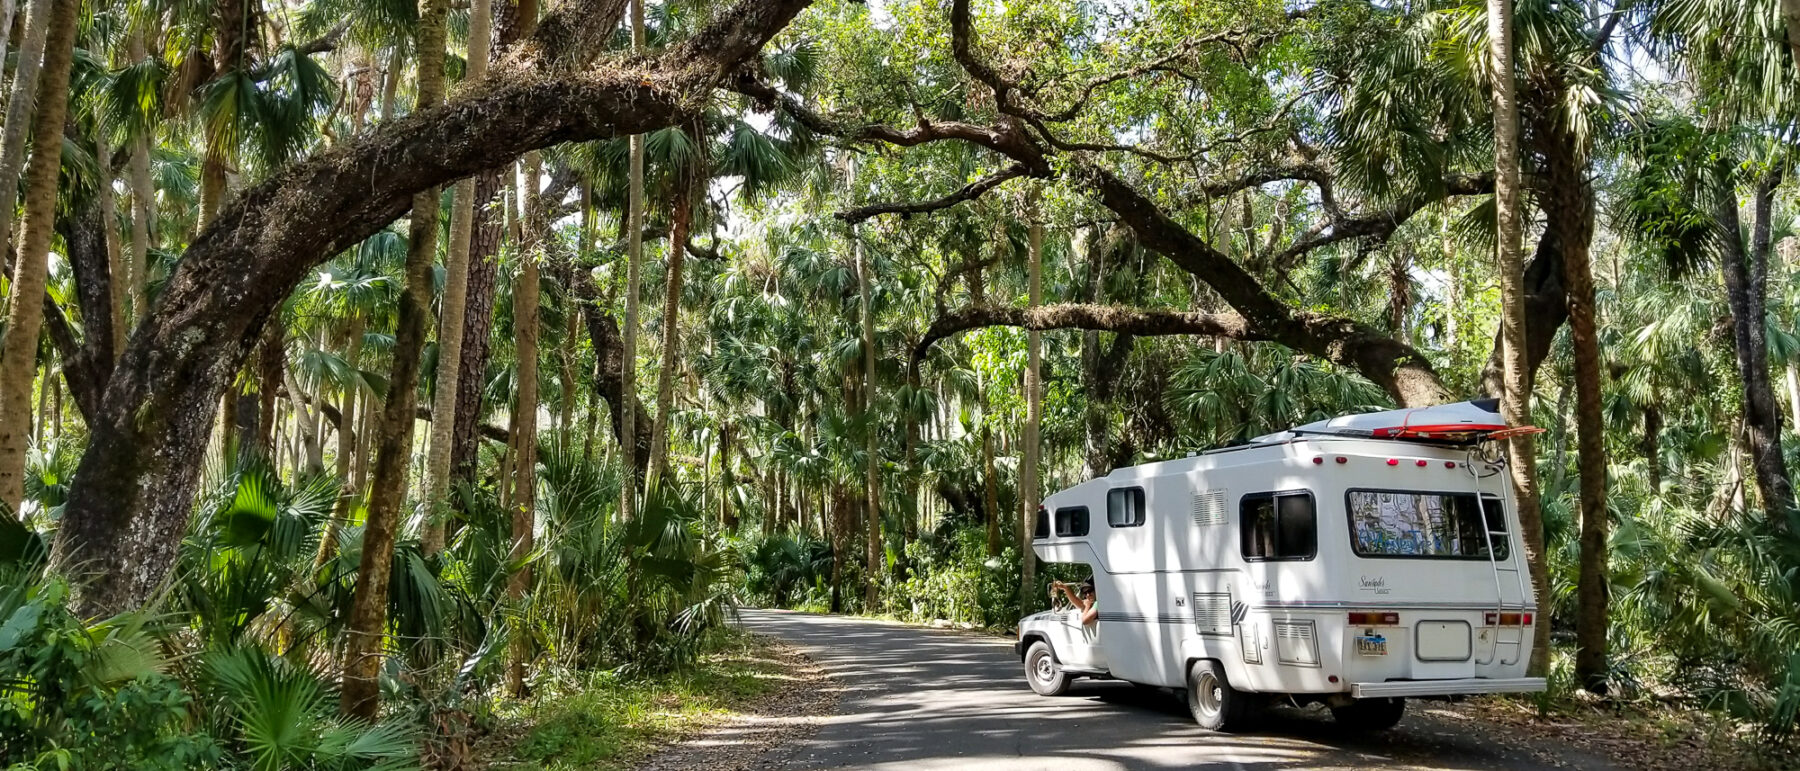 Florida Road Trip: Best of The Sunshine State